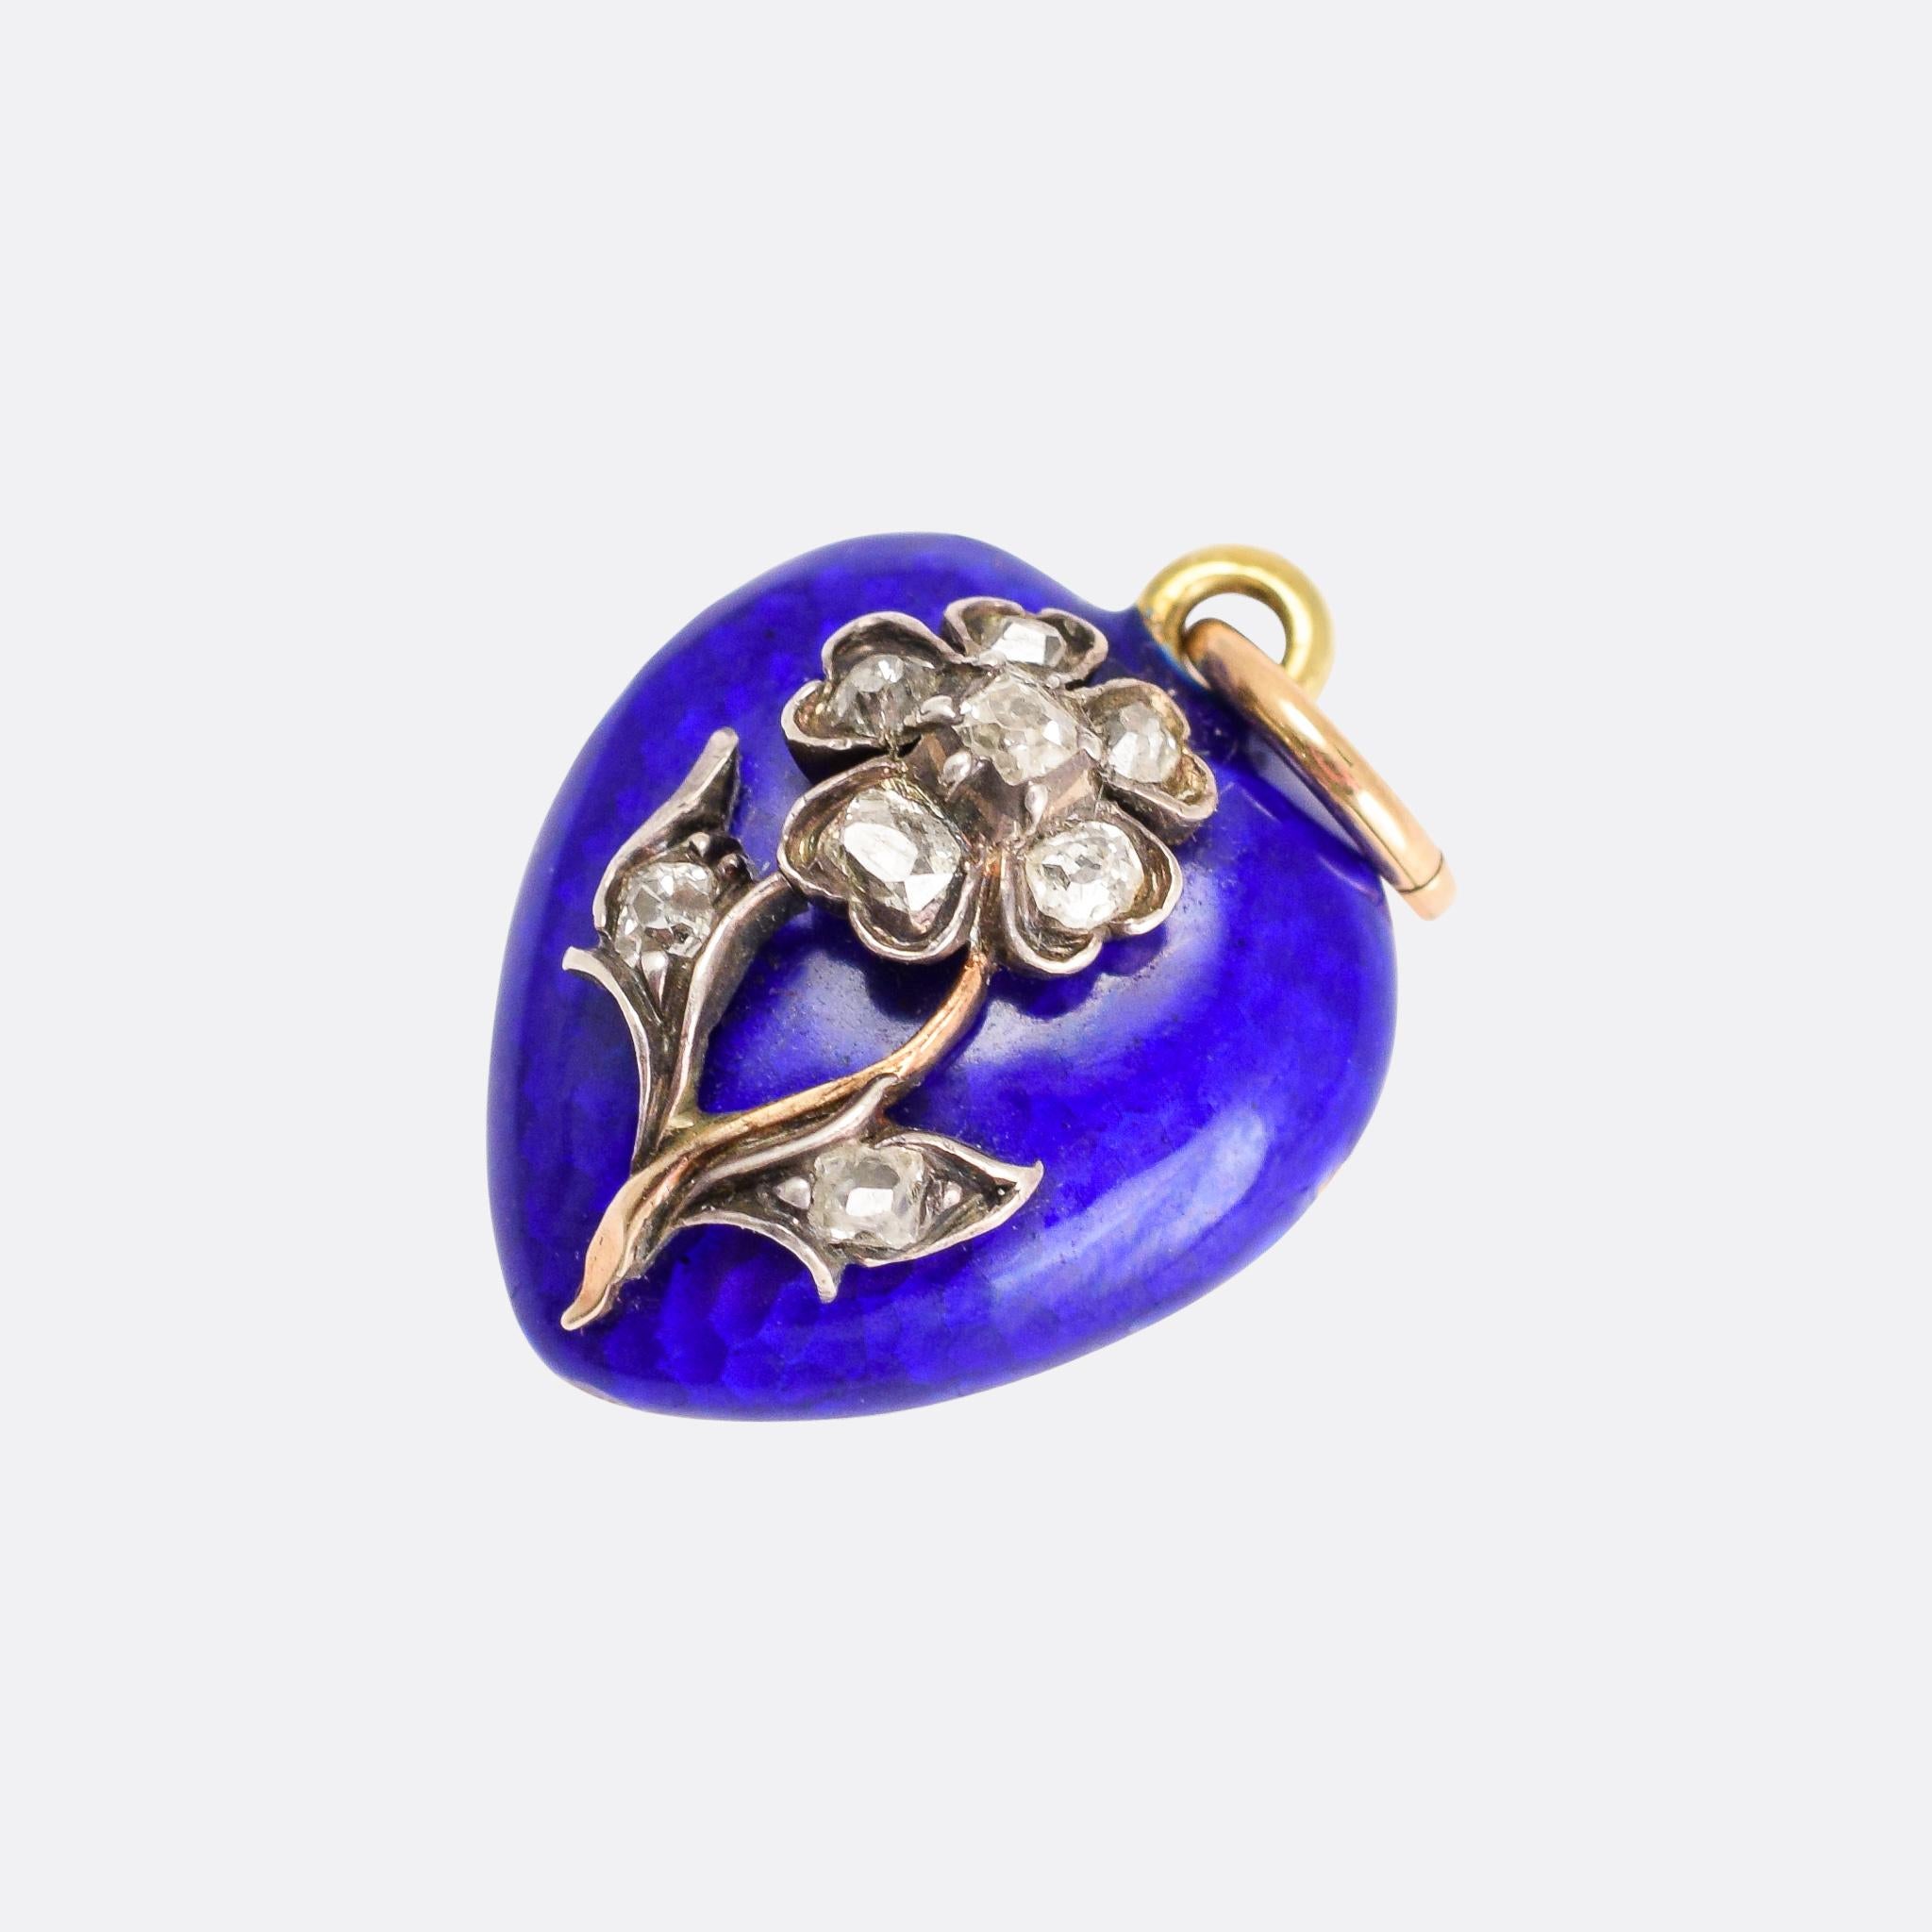 An adorable antique heart locket, the front finished in royal blue guilloché enamel and featuring an applied diamond-set Forget-Me-Not flower. It dates from the mid-Victorian era, circa 1860, and the craftsman ship is simply exceptional. Set with